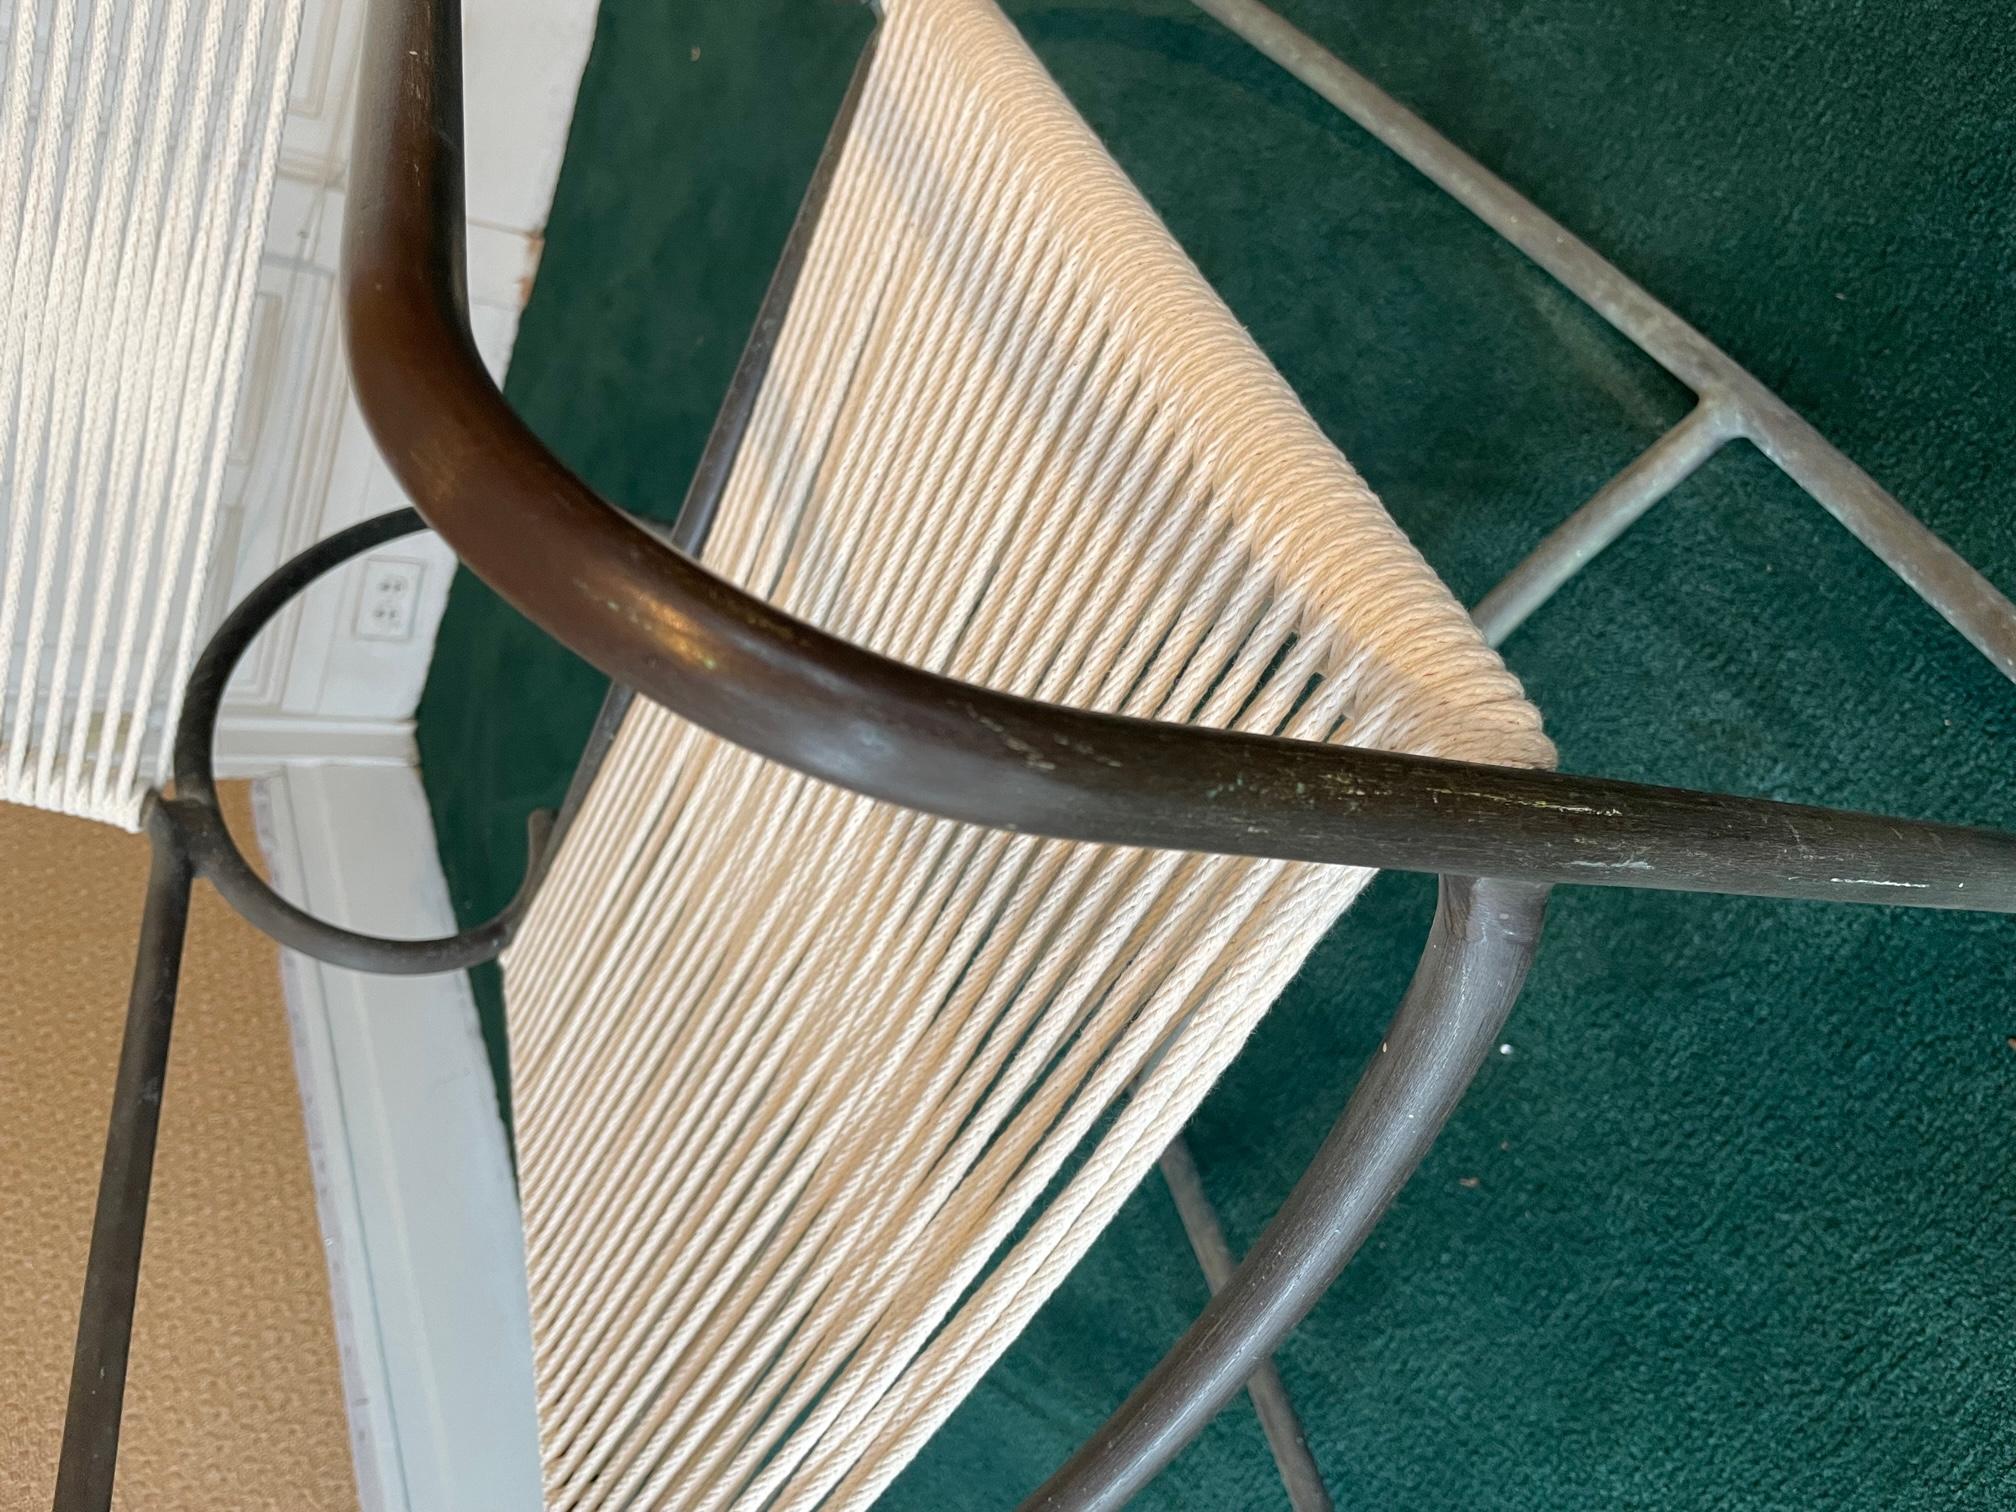 A bronze rocker designed by Walter Lamb for Brown Jordan Furniture, this bronze modernist piece has a powerful simplicity of line that makes it an iconic design. The original cotton yacht cording on the seat and back has been replaced and is what